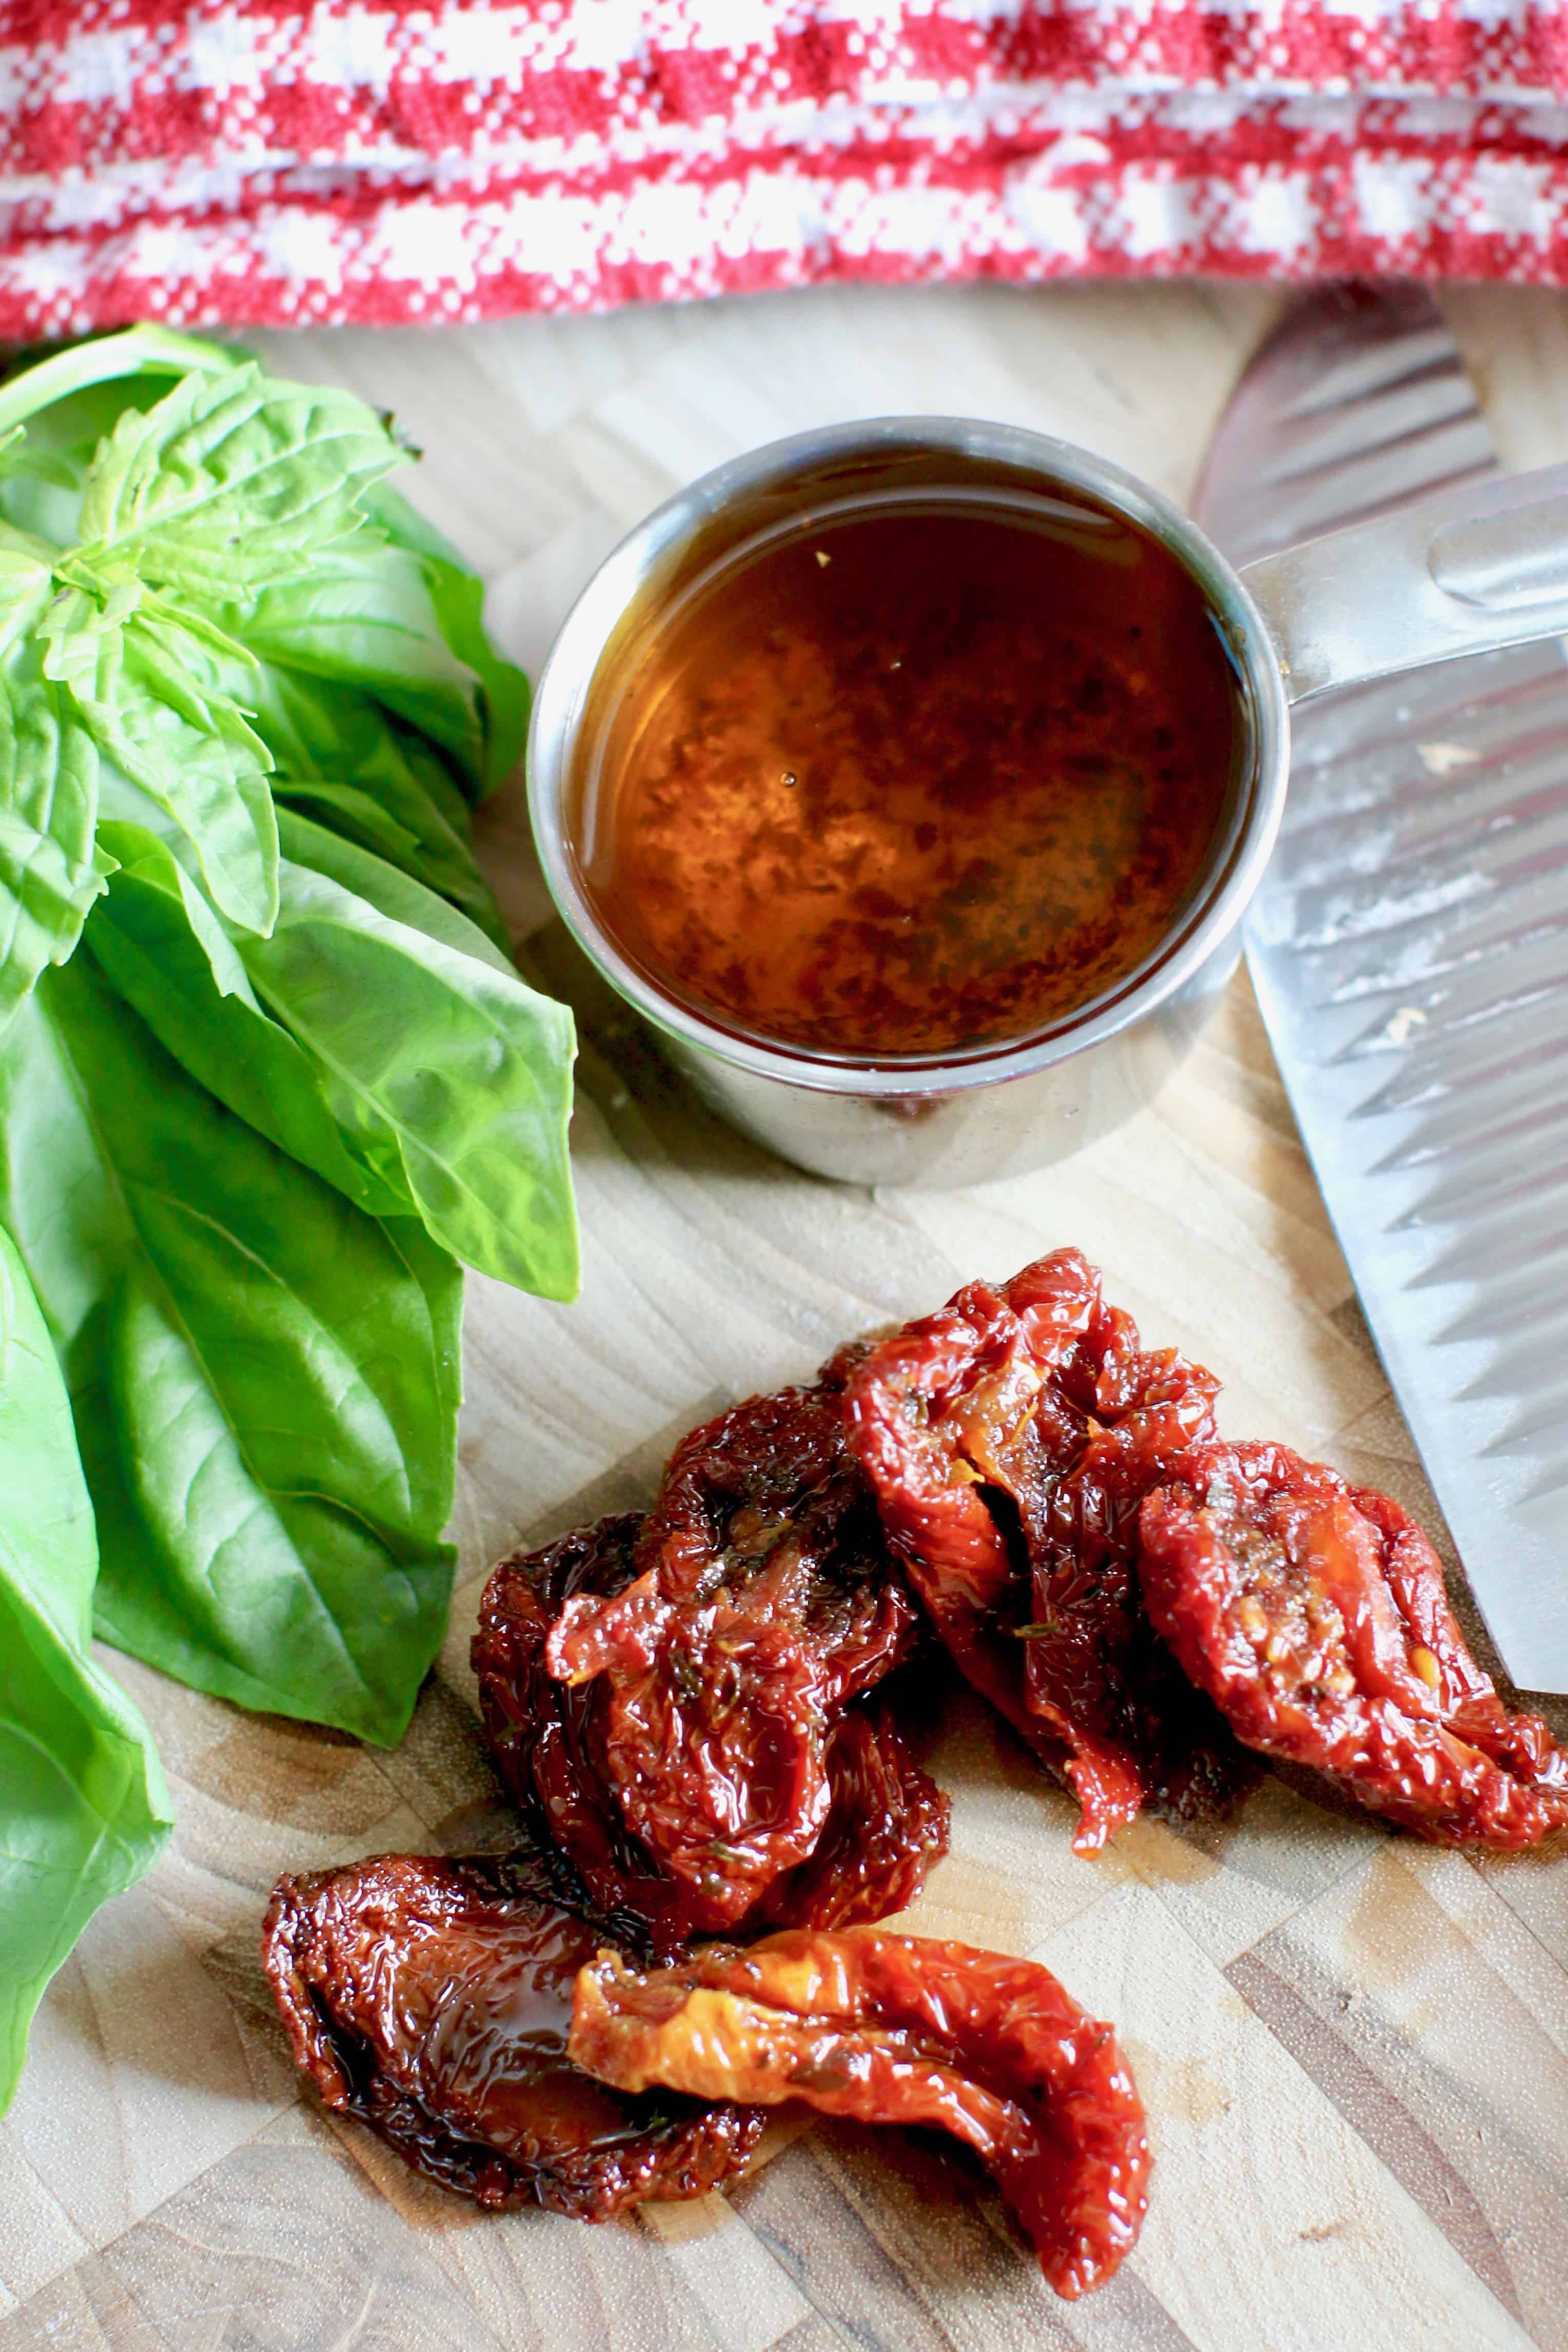 sun dried tomato oil shown in a measuring cup with several sun-dried tomatoes on a cutting board with fresh basil.